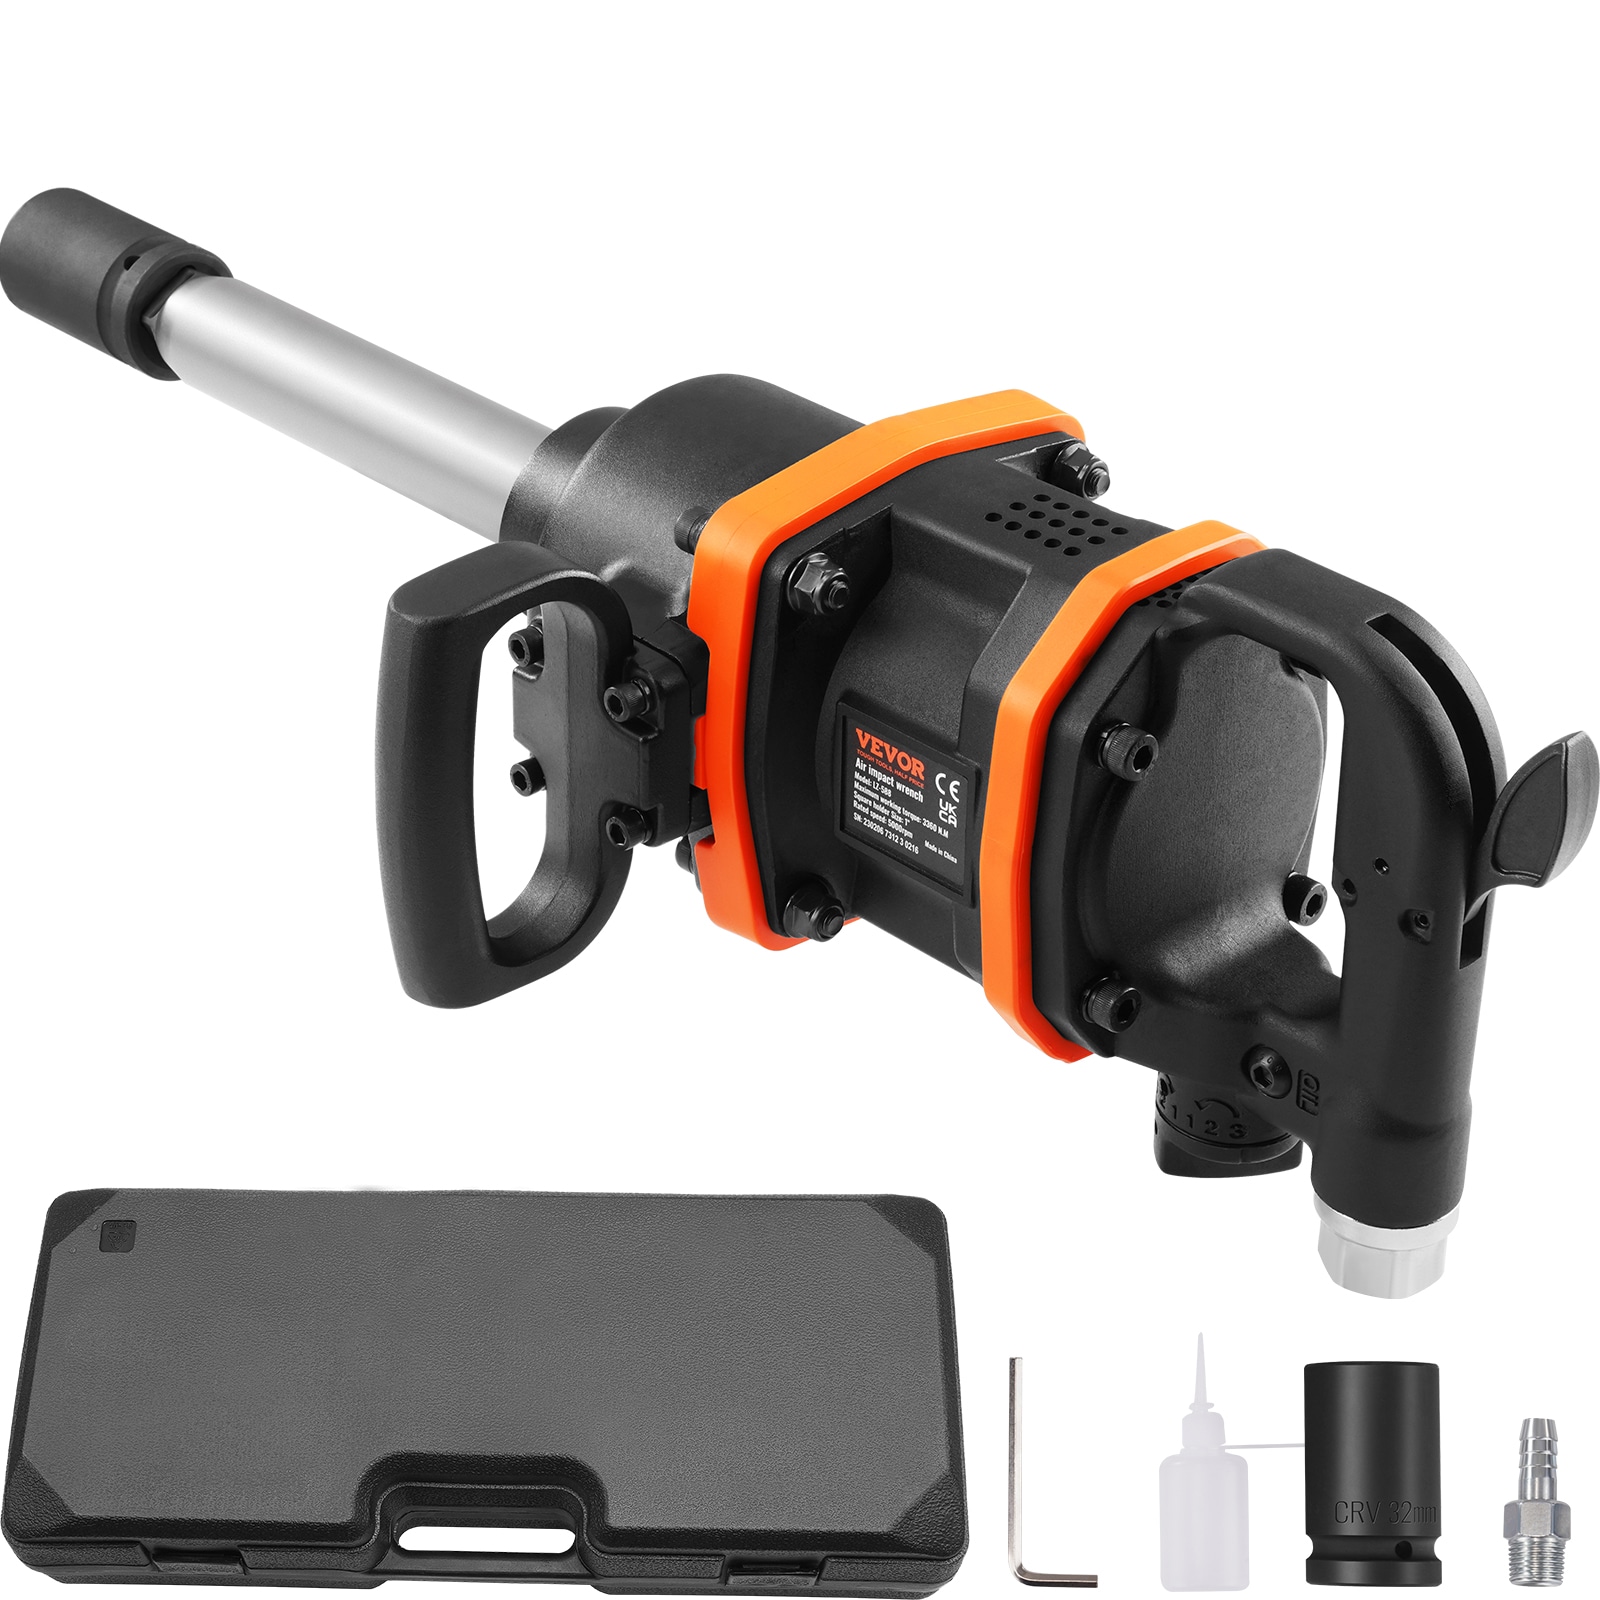 VEVOR 1-in 2900-ft lb Air Impact Wrench in the Air Impact Wrenches